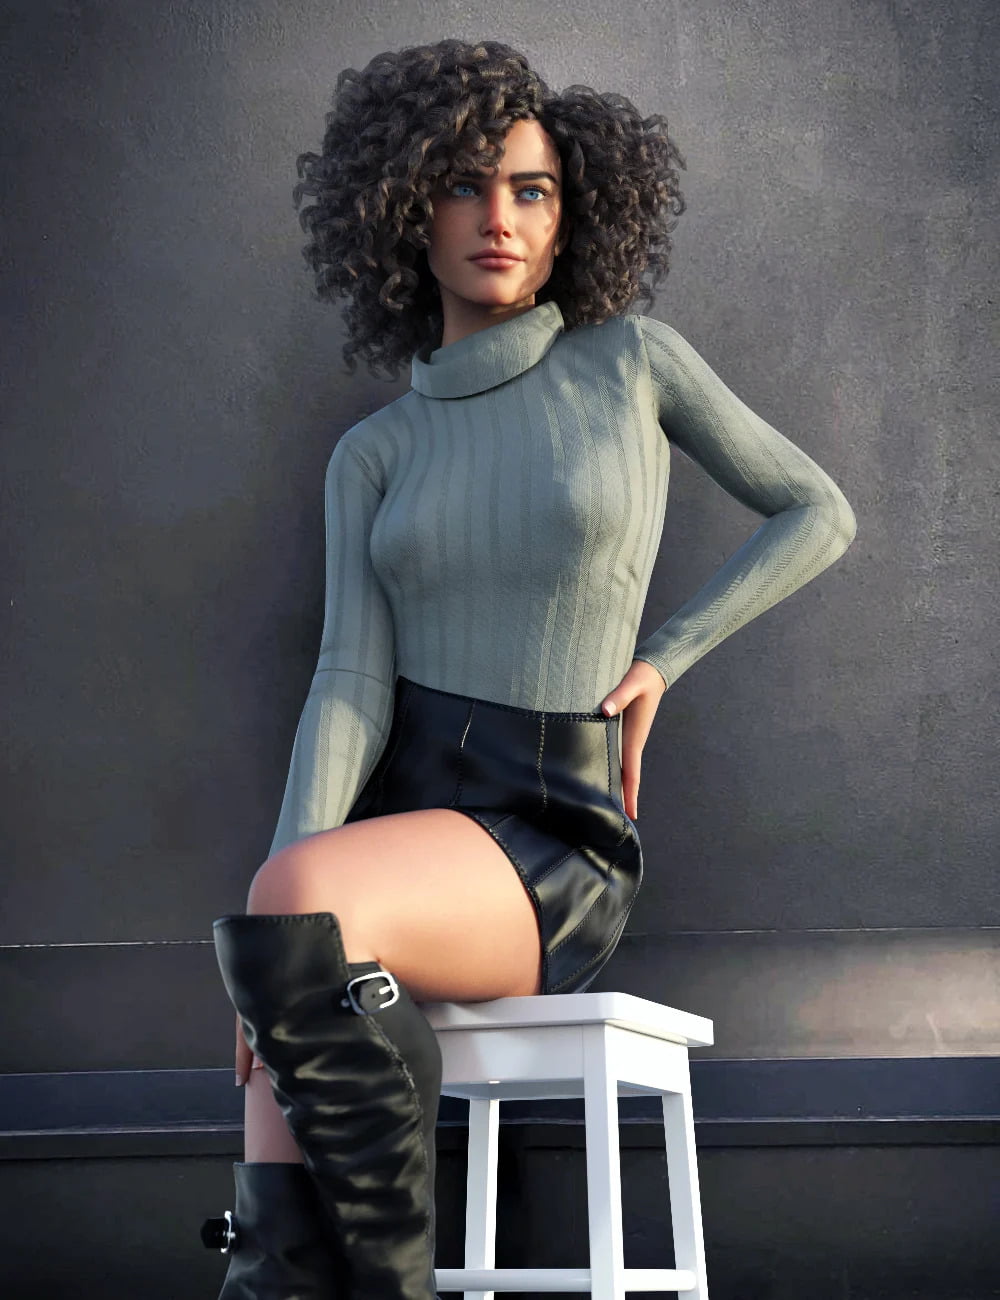 Dforce Casual Fashion Outfit Vol 2 For Genesis 8 And 81 Females Bundle ⋆ Freebies Daz 3d